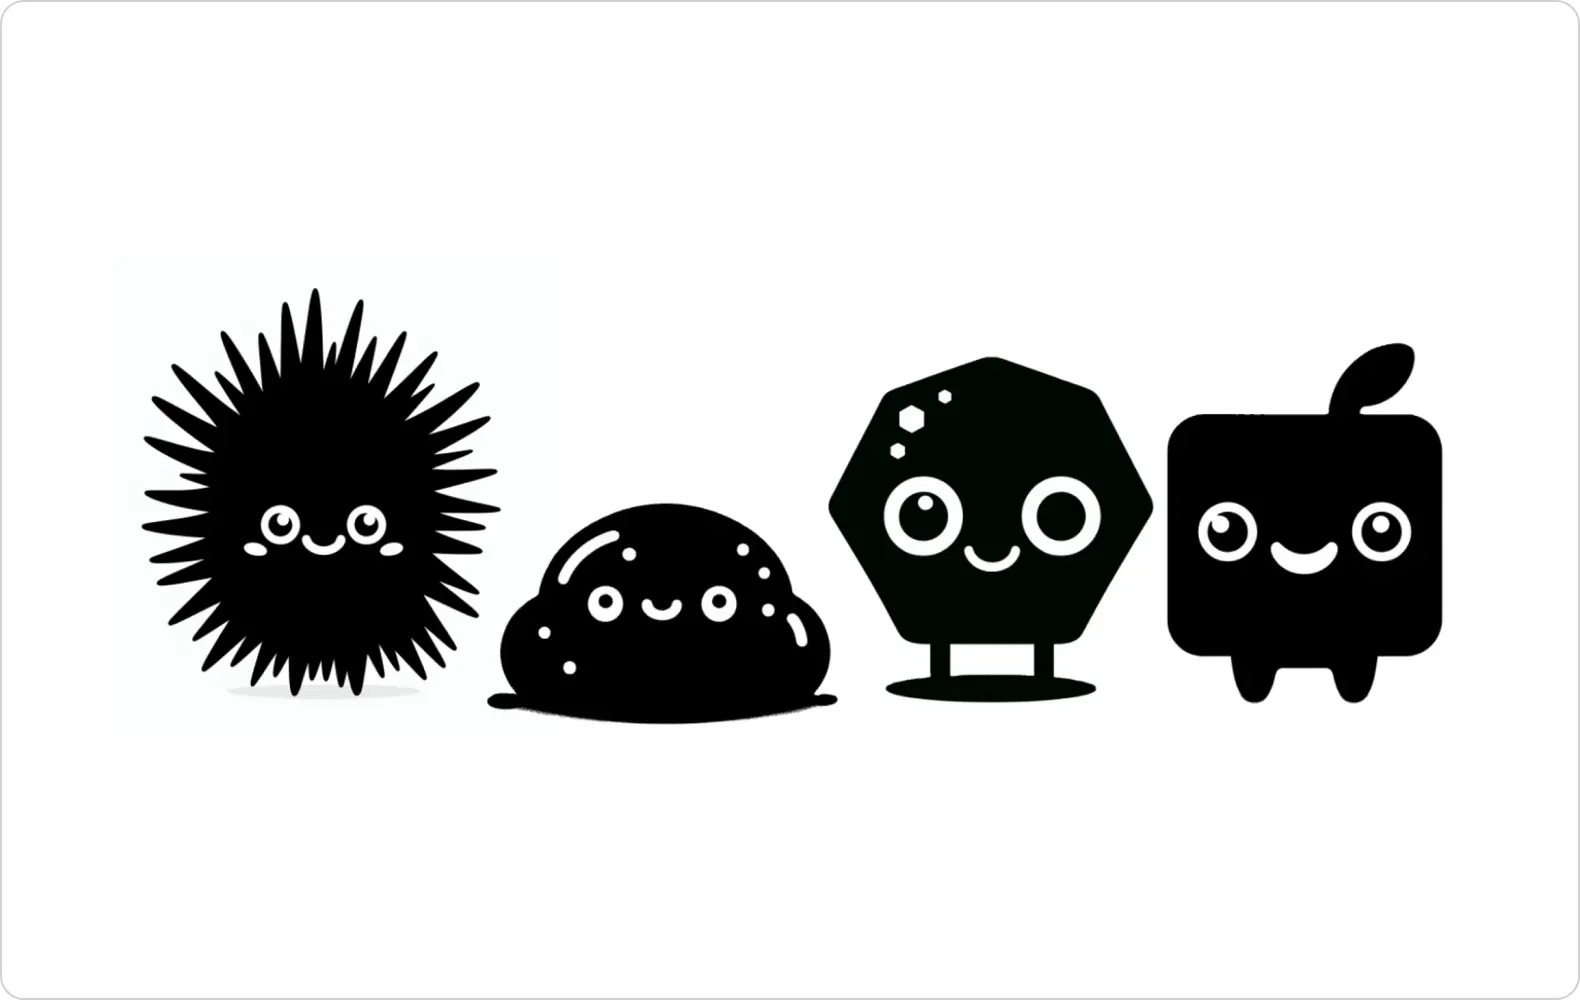 Dall-e generated black figures resembling stickers, characters, and icons